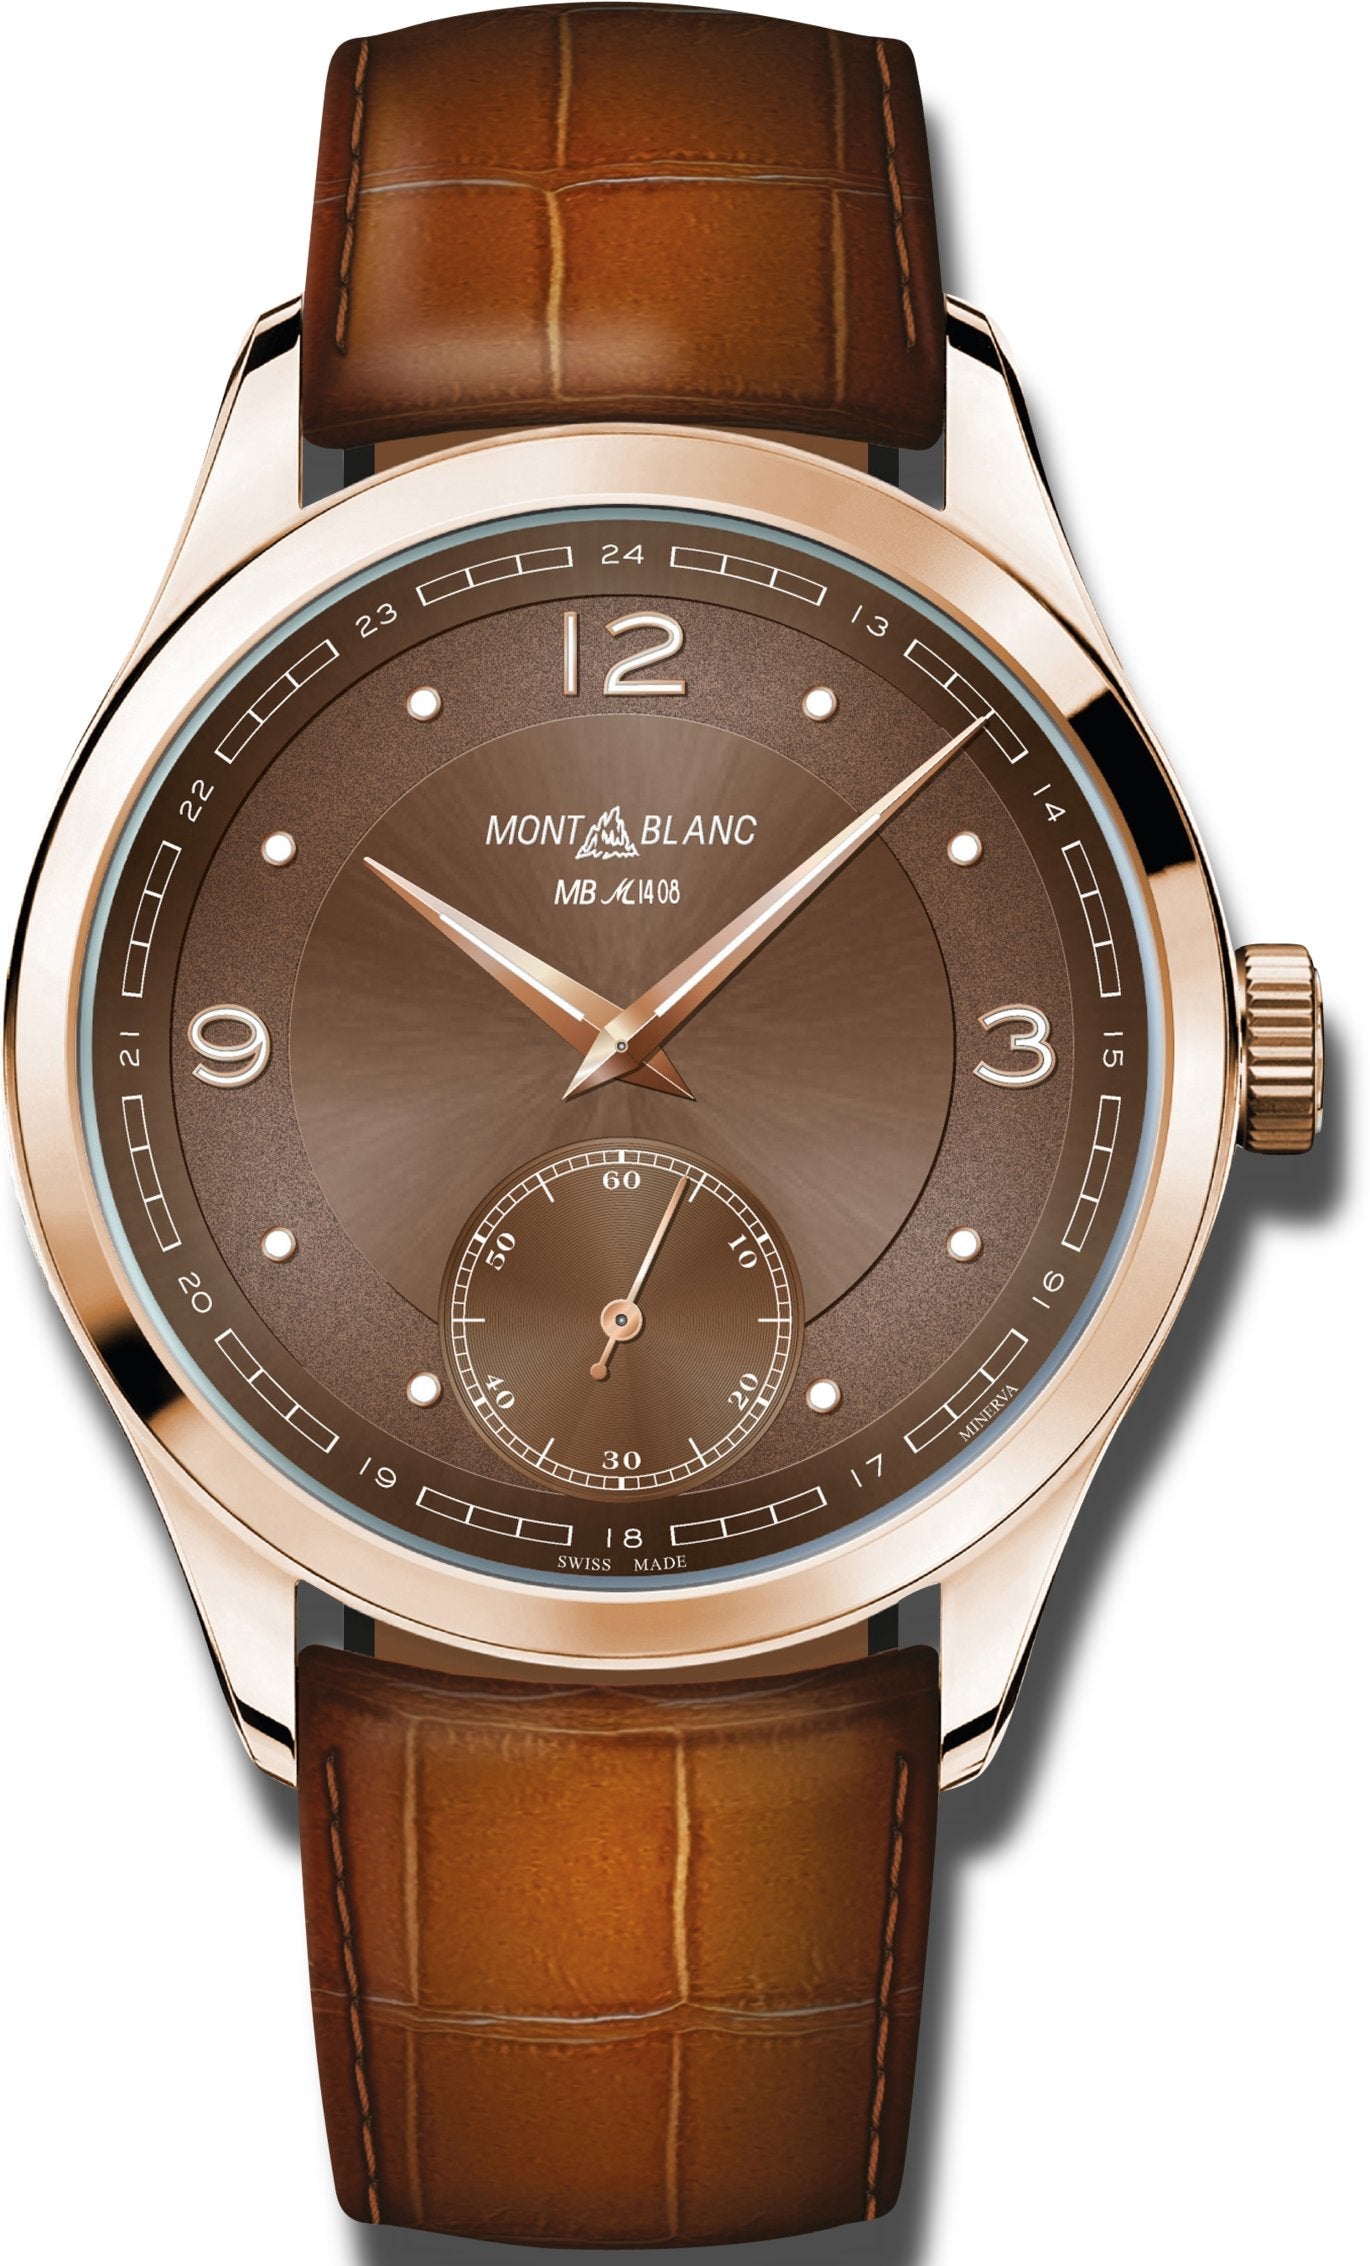 Photos - Wrist Watch Mont Blanc Montblanc Watch Heritage Pythagore Small Second Limited Edition - Brown MN 